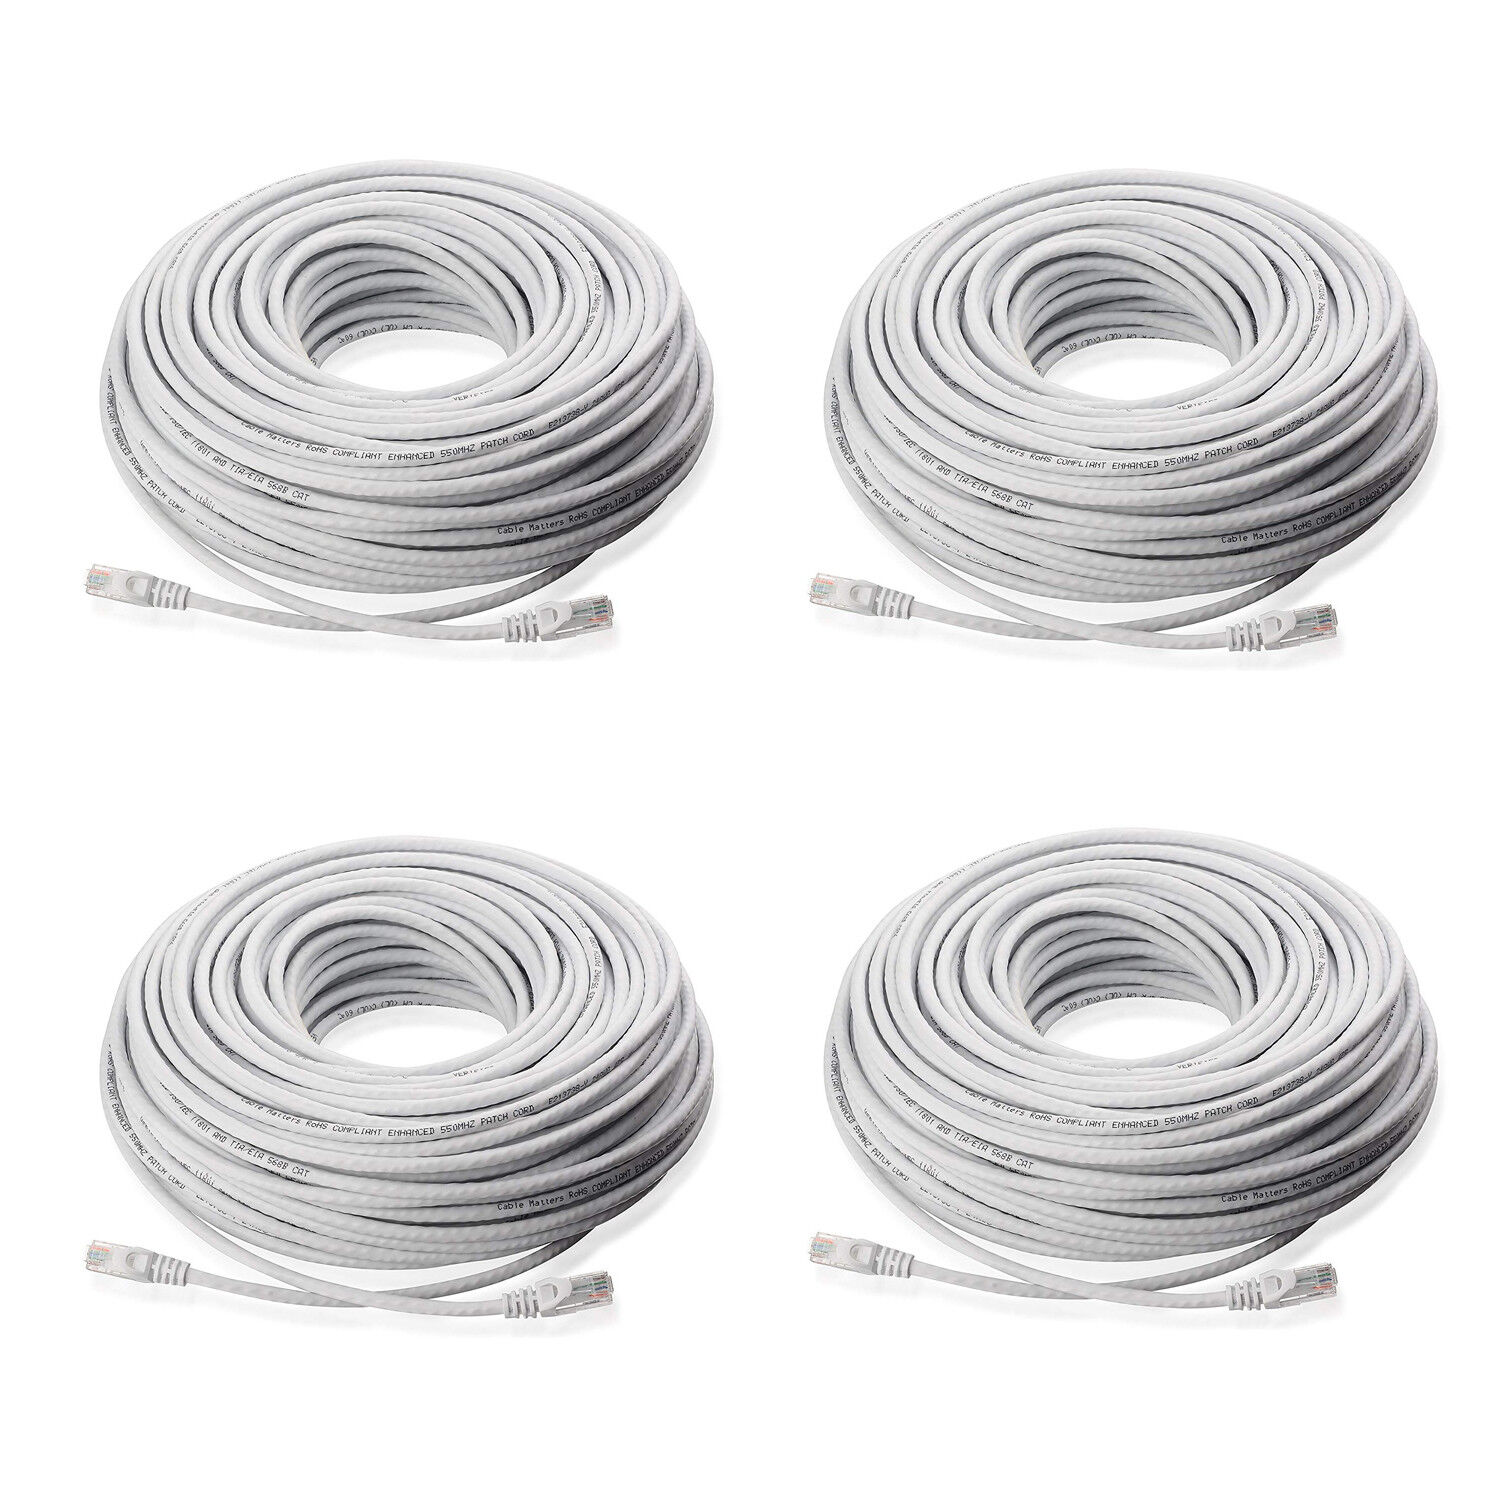 4-Pack 100FT CAT5 Cat5e Ethernet Cable RJ45 Network Wire Router PoE Switch Cord